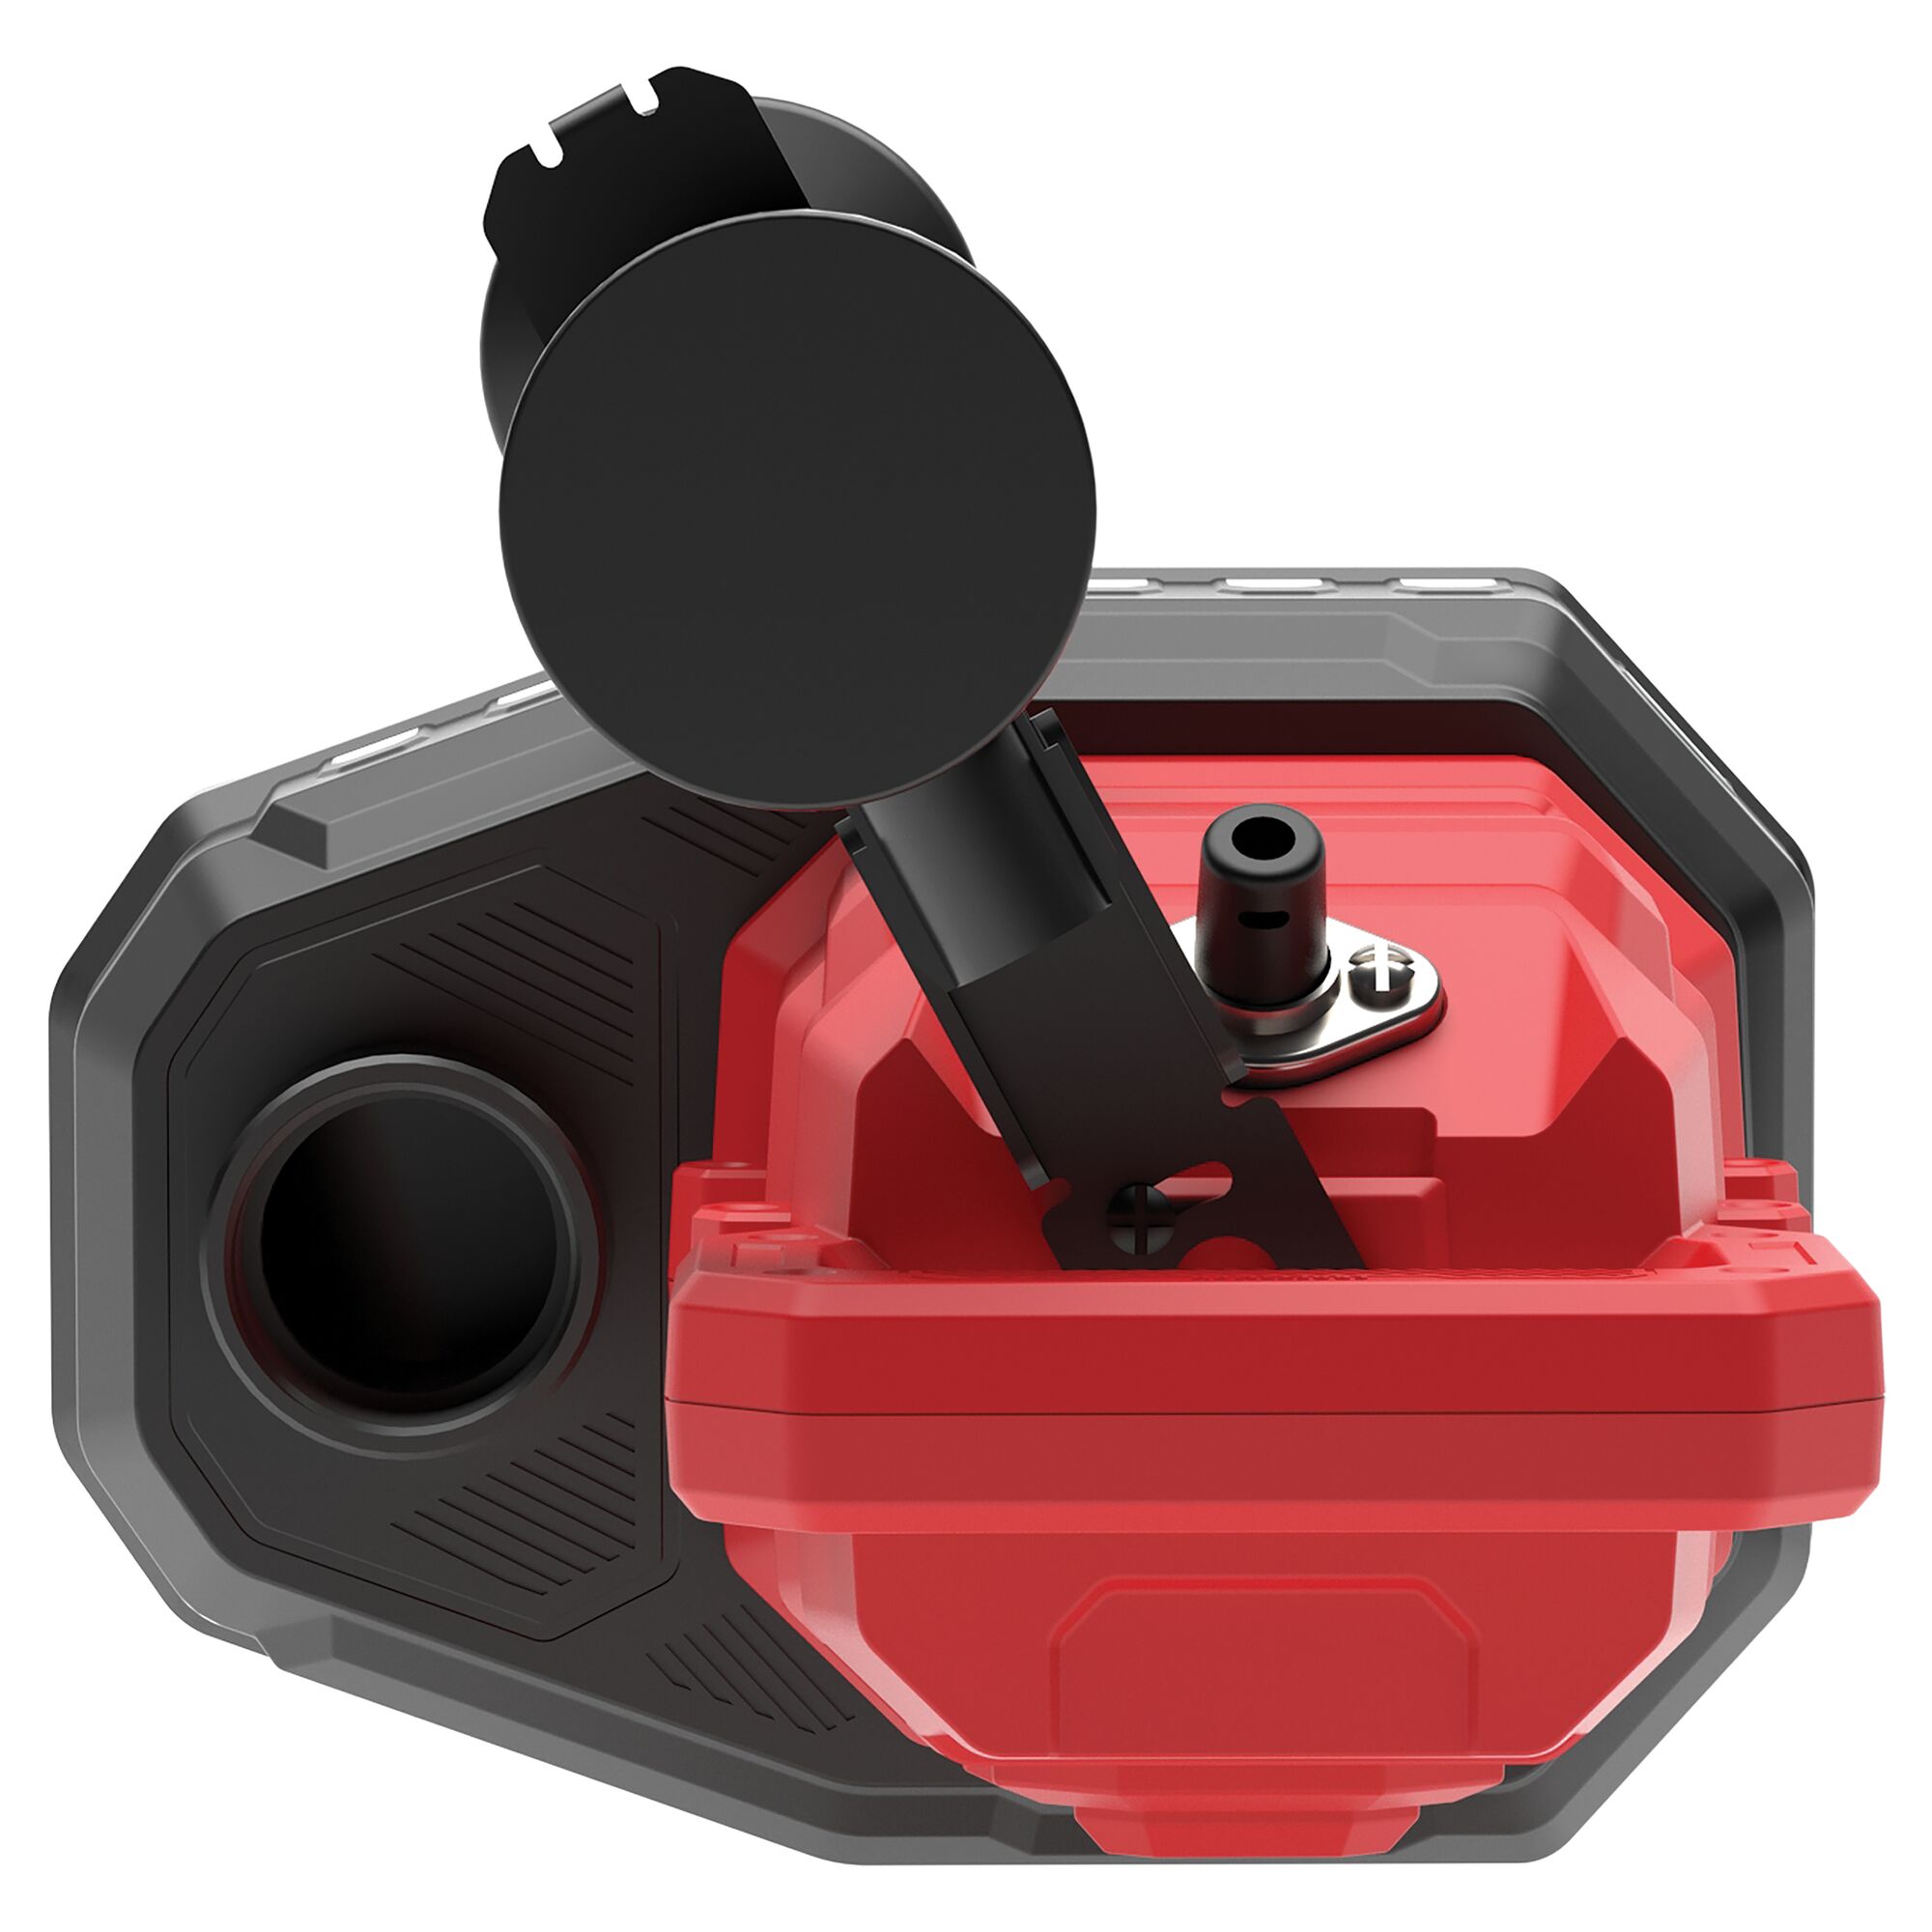 1-3HP SUMP PUMP REINFORCED THERMOPLASTIC SUBMERSIBLE AUTOMATIC VERTICAL SWITCH TOP VIEW